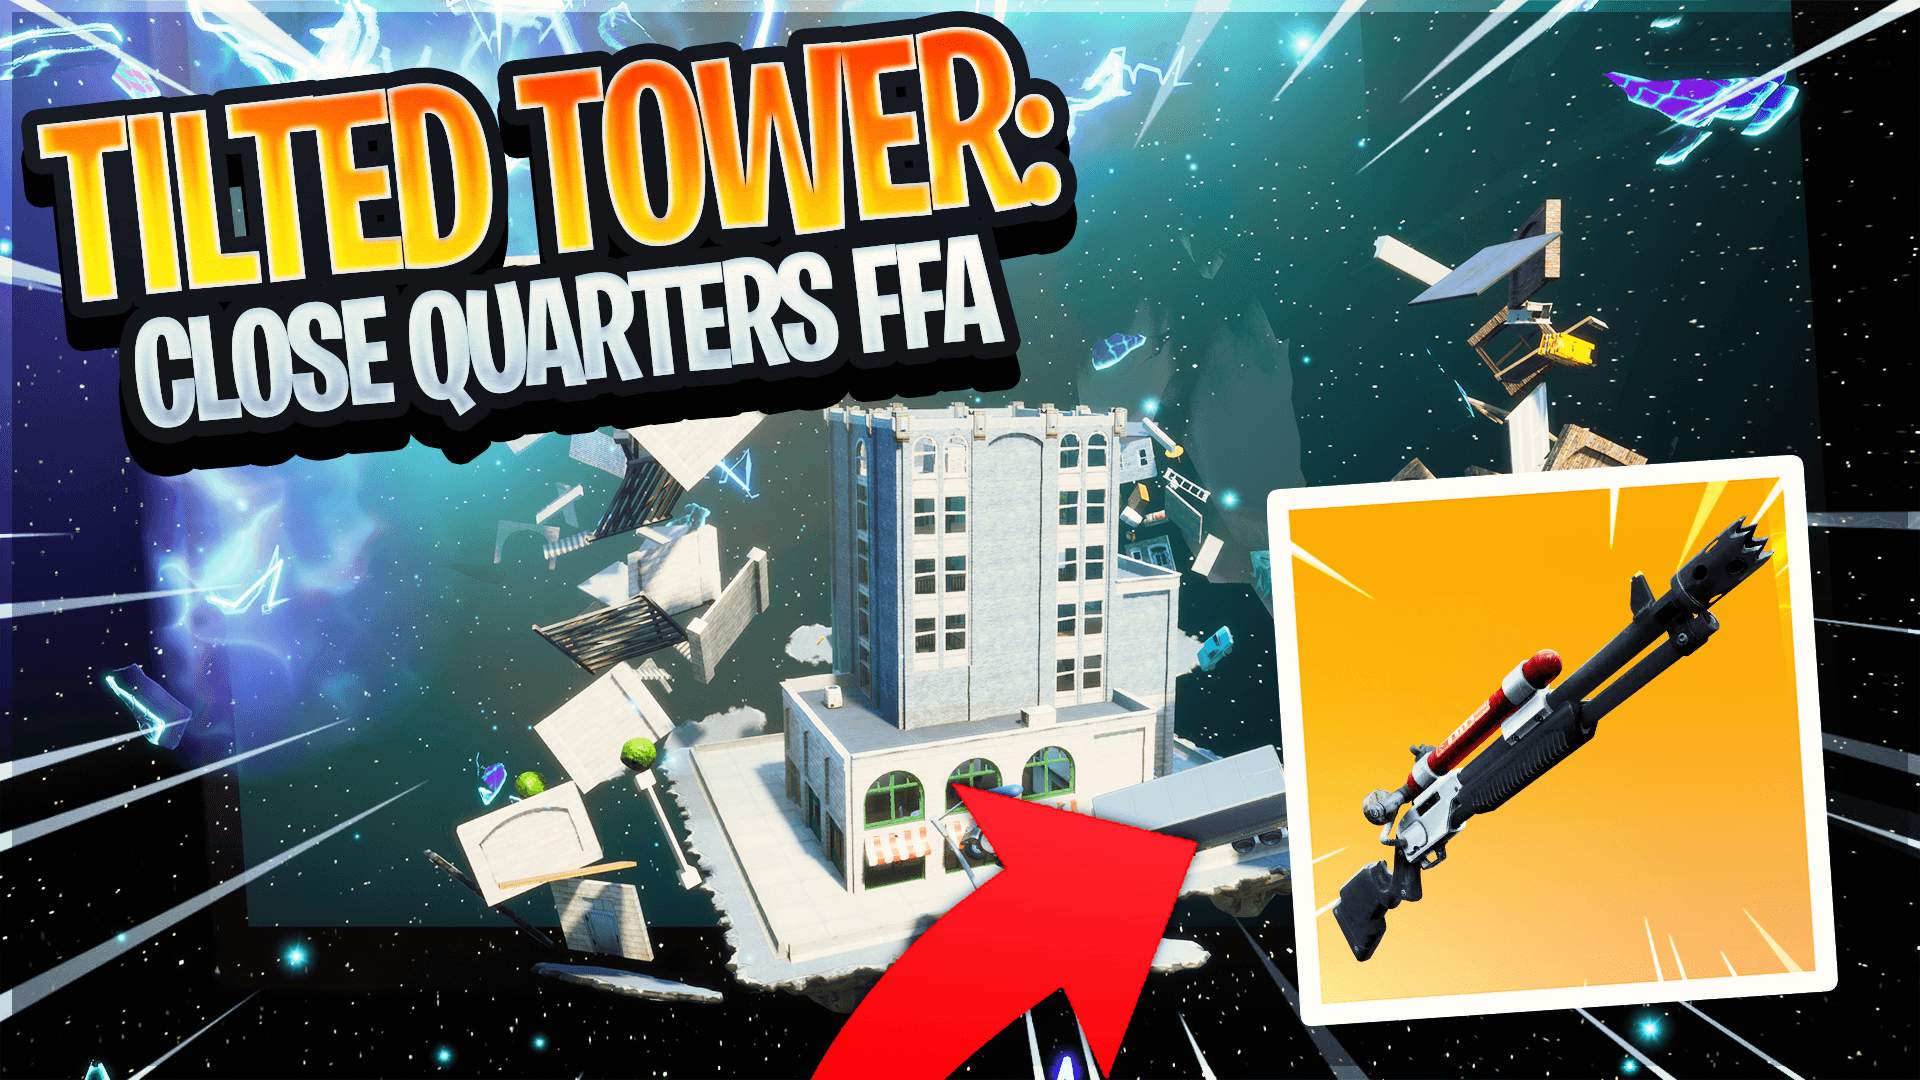 Close Quarters Fortnite Map Tilted Tower Close Quarters Ffa Fortnite Creative Map Code Dropnite